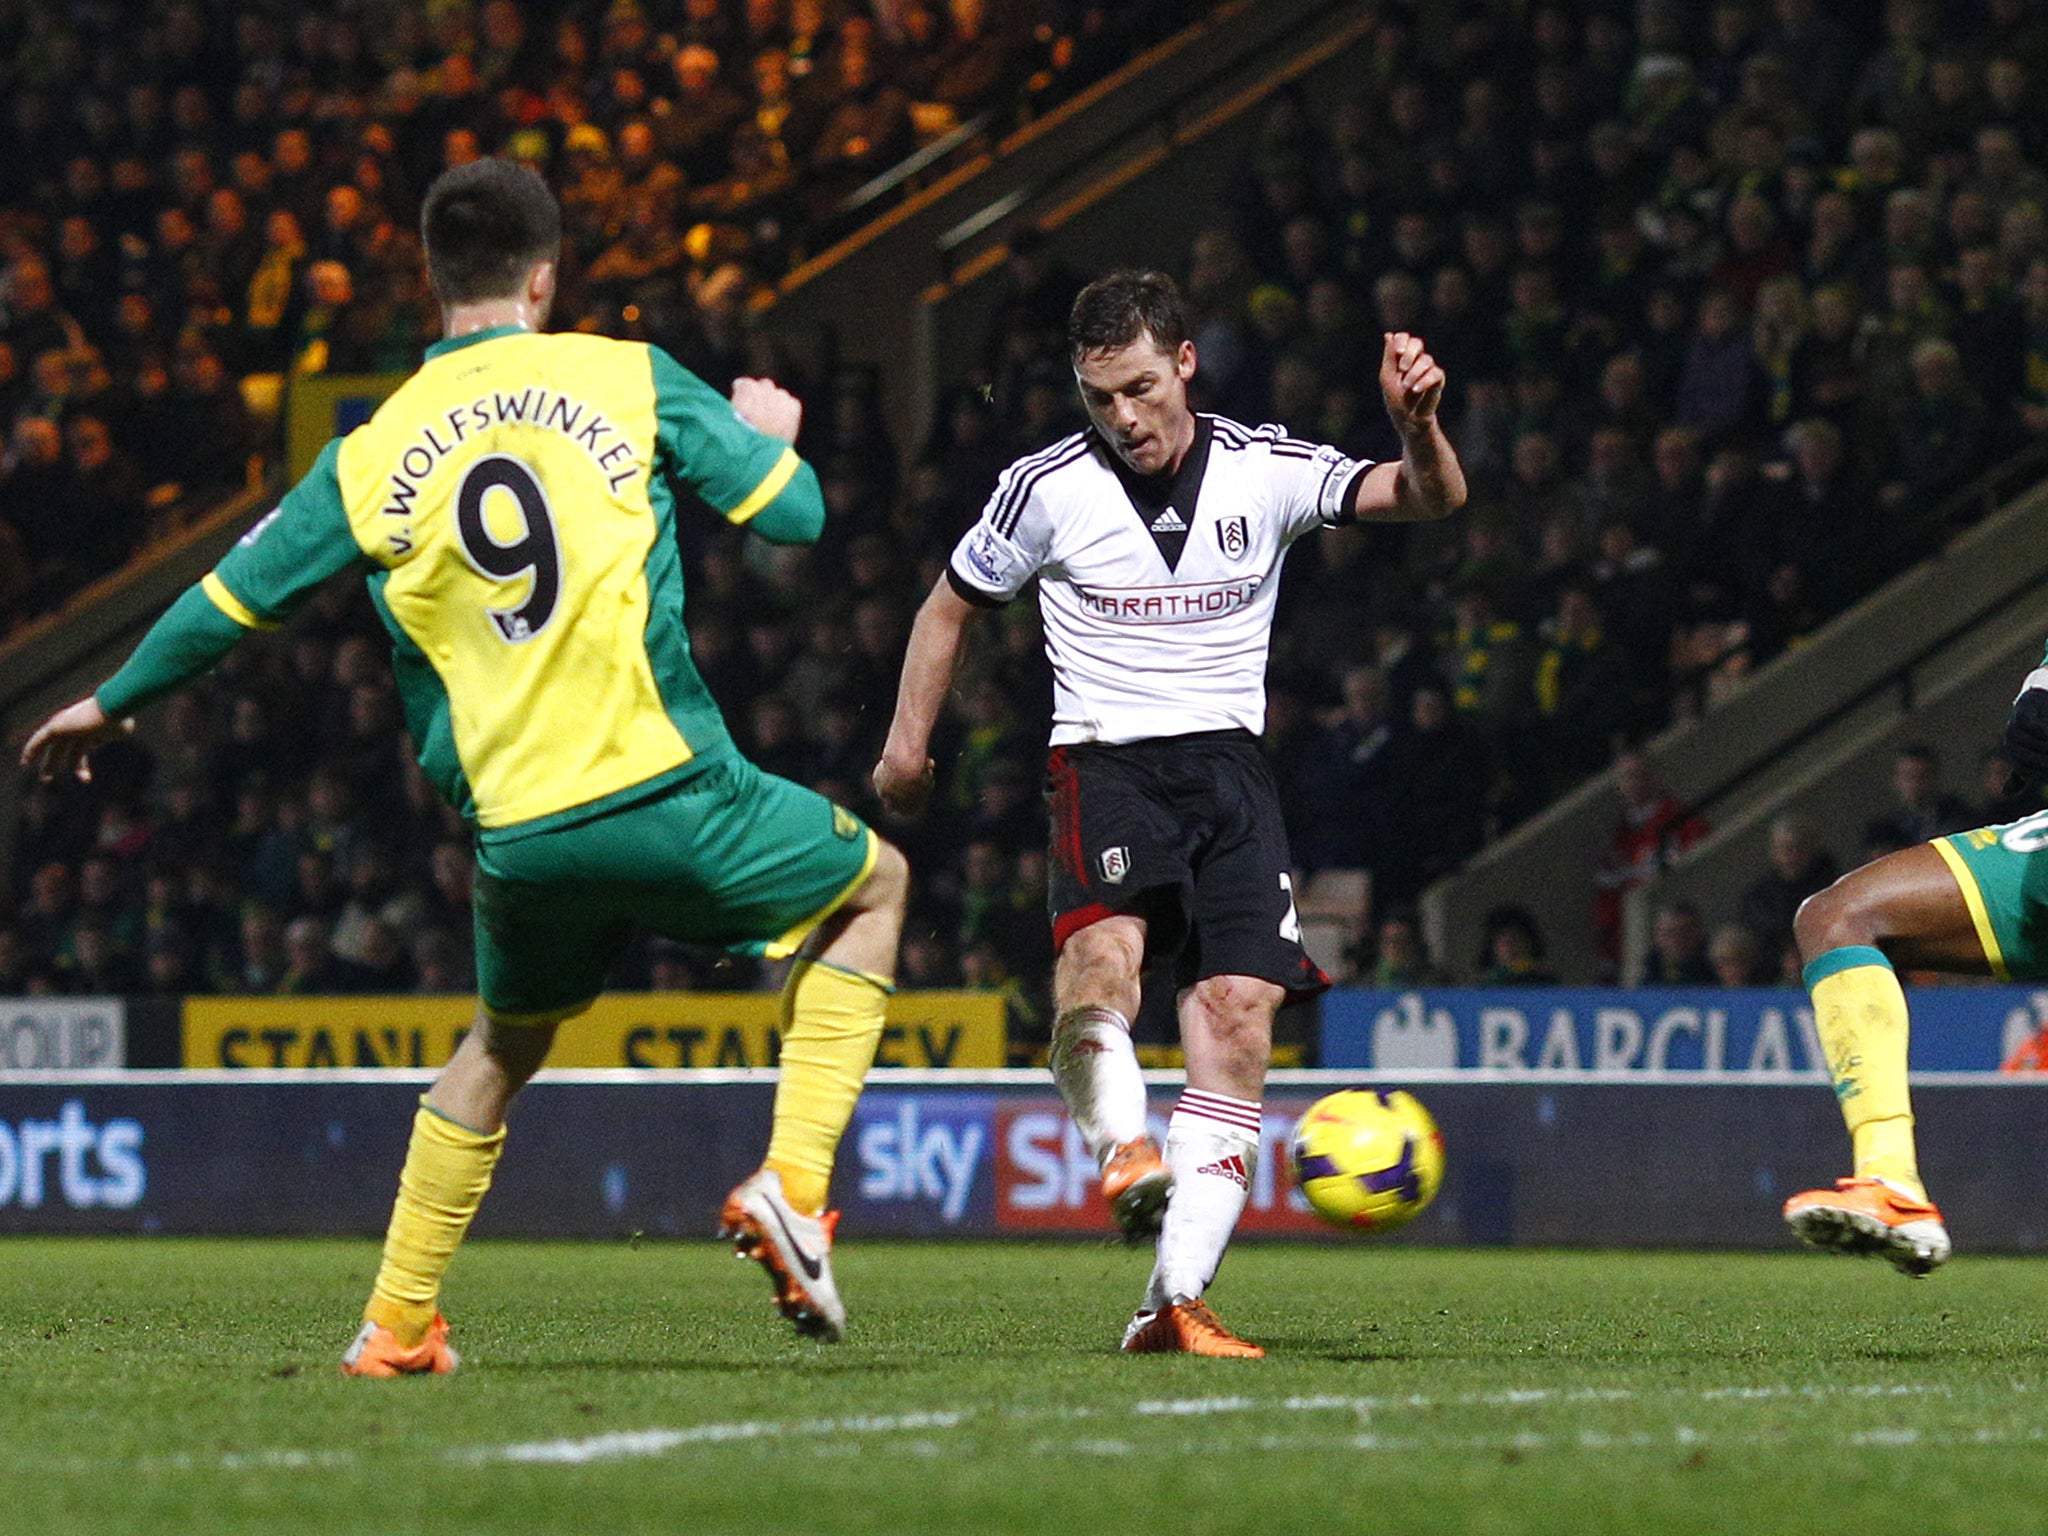 Scott Parker smashes home the winning goal in Fulham's 2-1 win over Norwich City